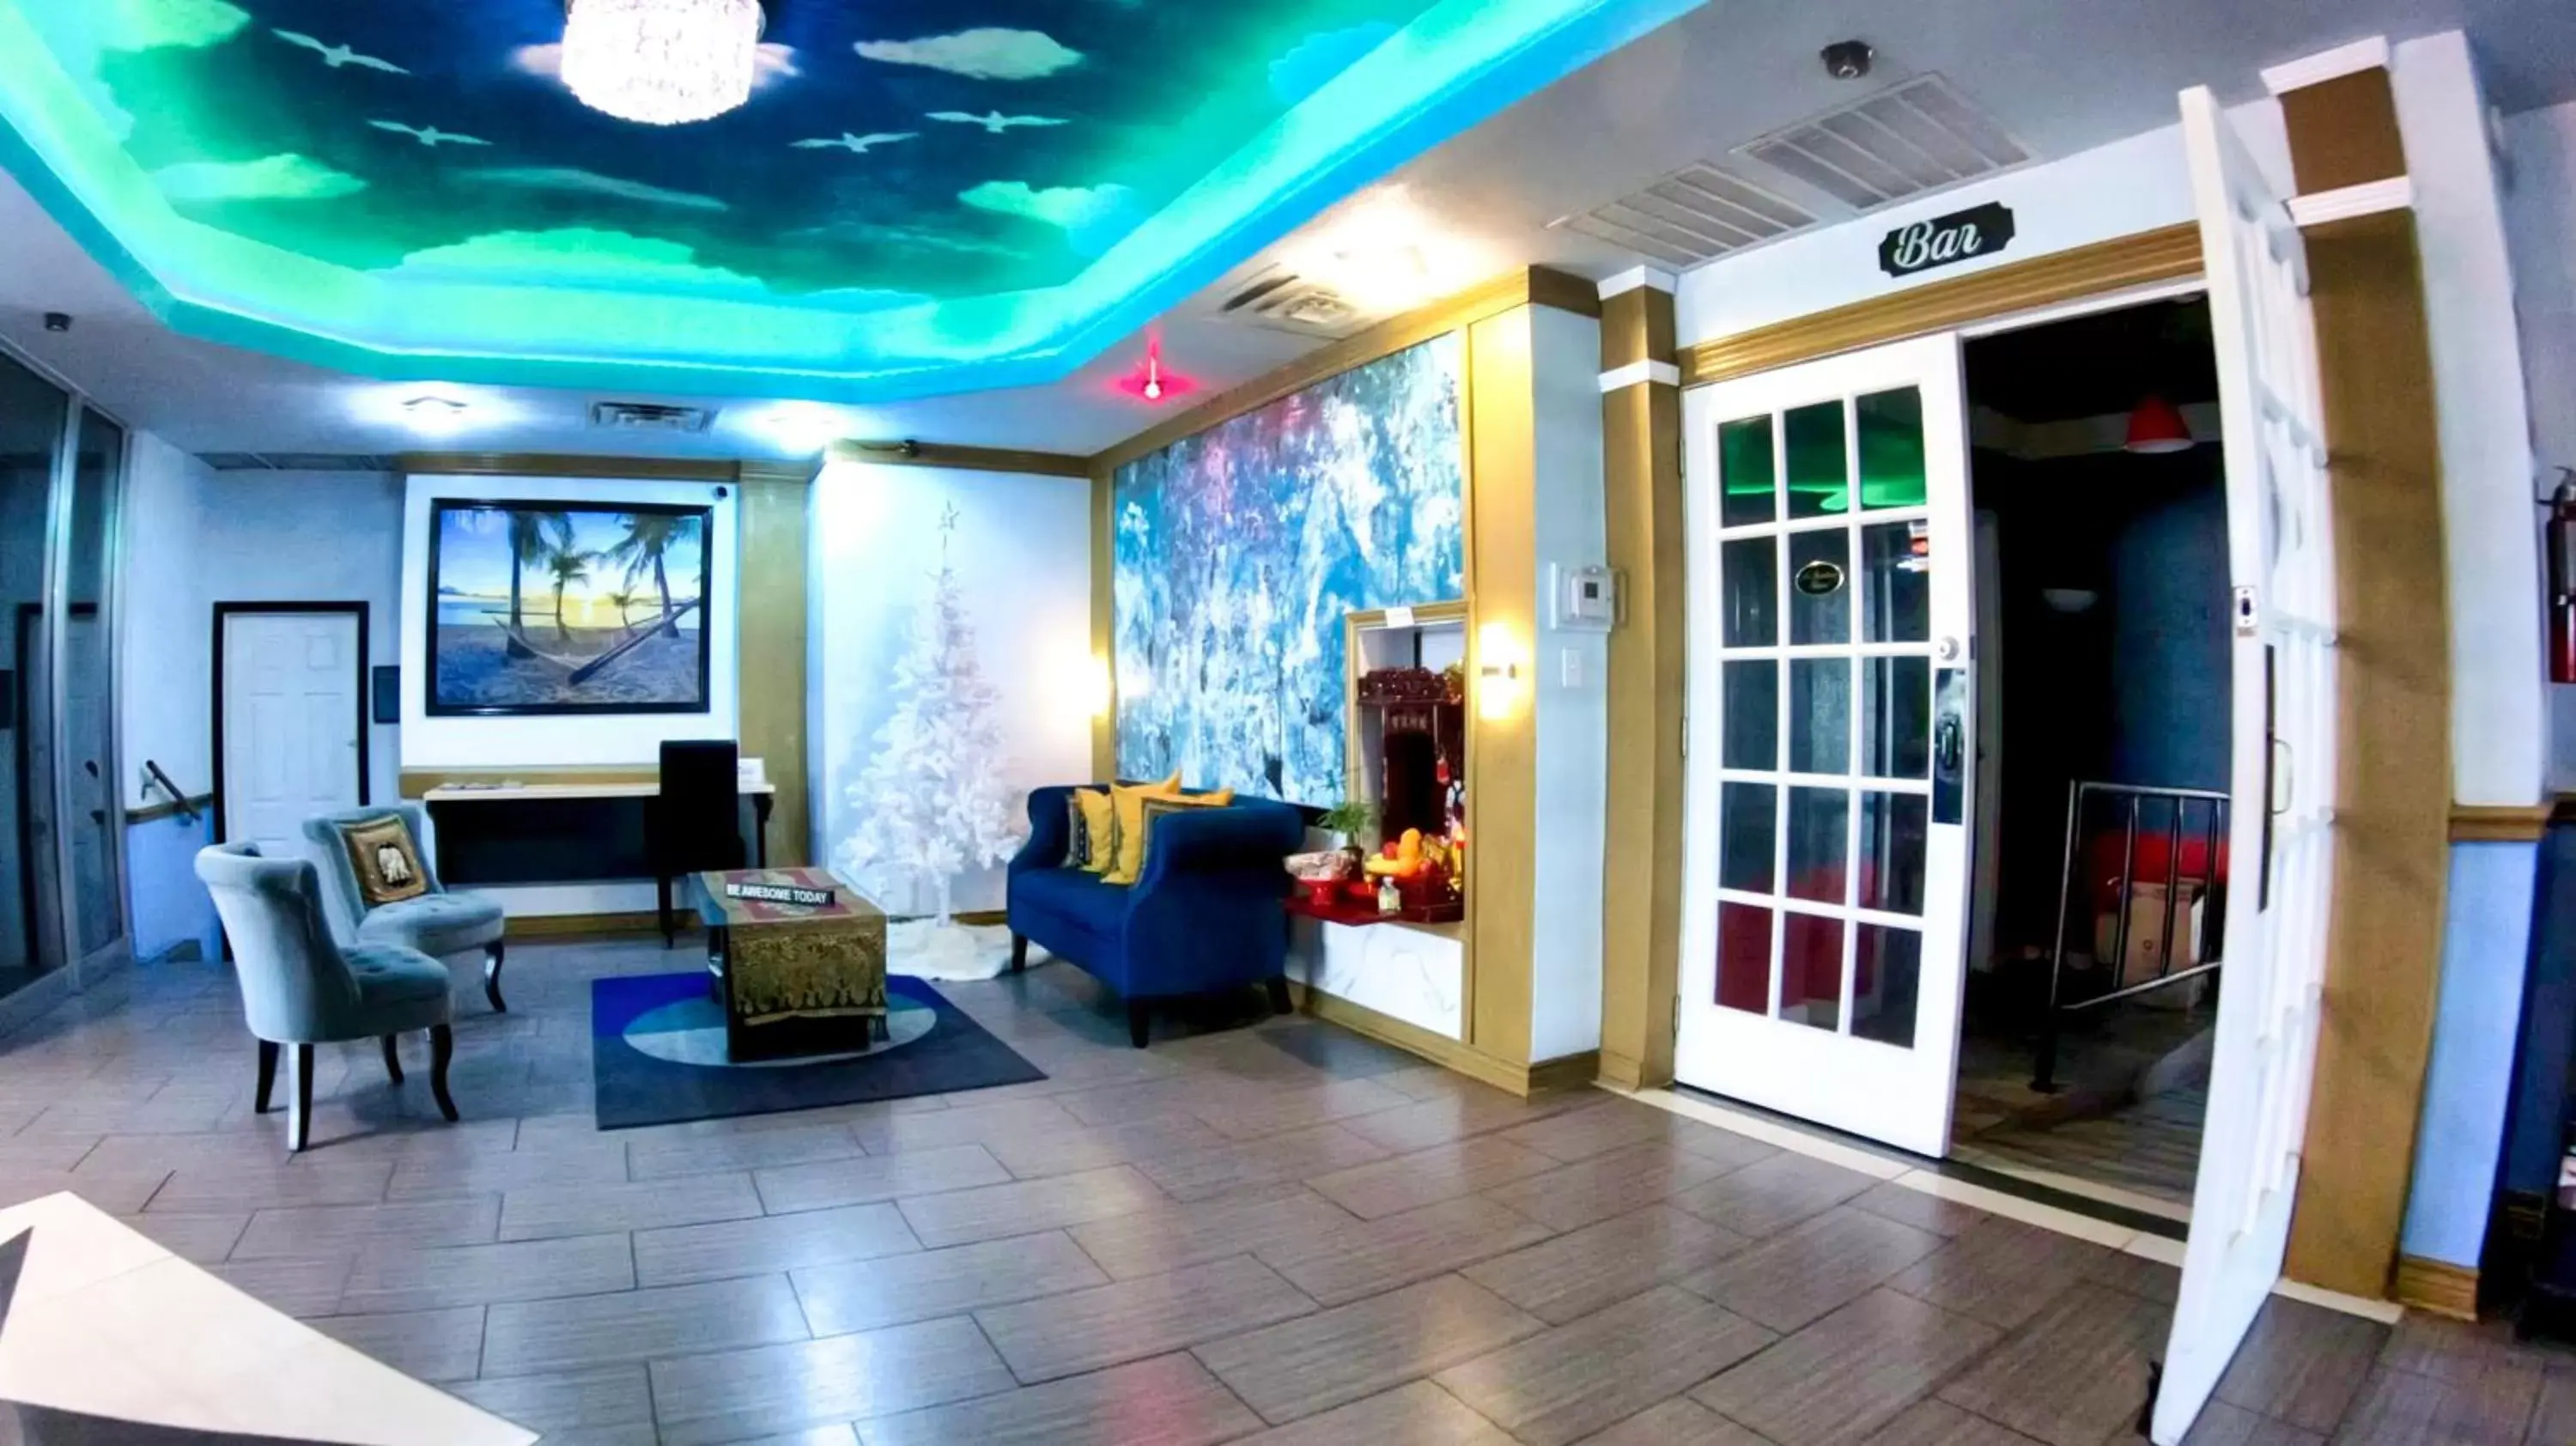 Lobby or reception in R Nite Star Inn and Suites -Home of the Cowboys & Rangers